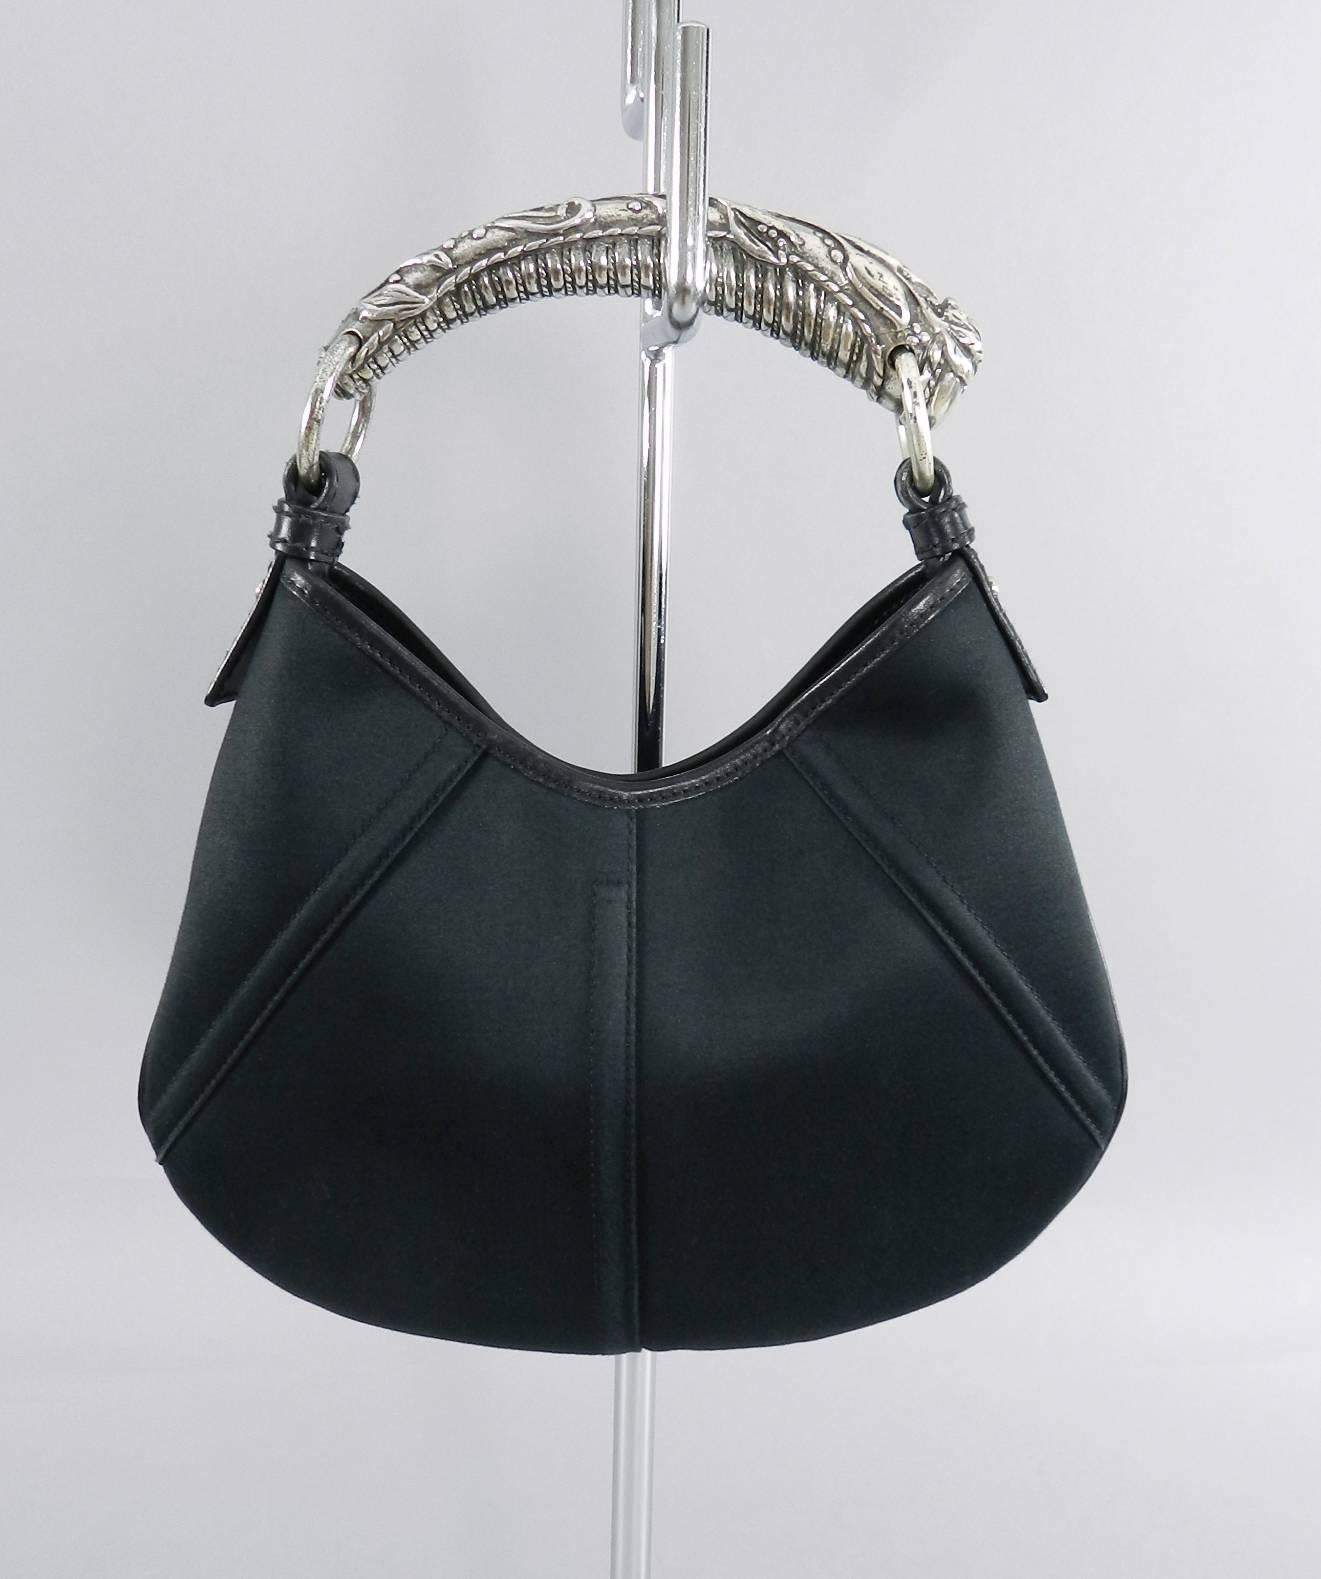 Yves Saint Laurent YSL by Tom Ford Black Mombasa Bag.  Satin with black leather trim and heavy silver horn handle. Small evening size measuring 10.5